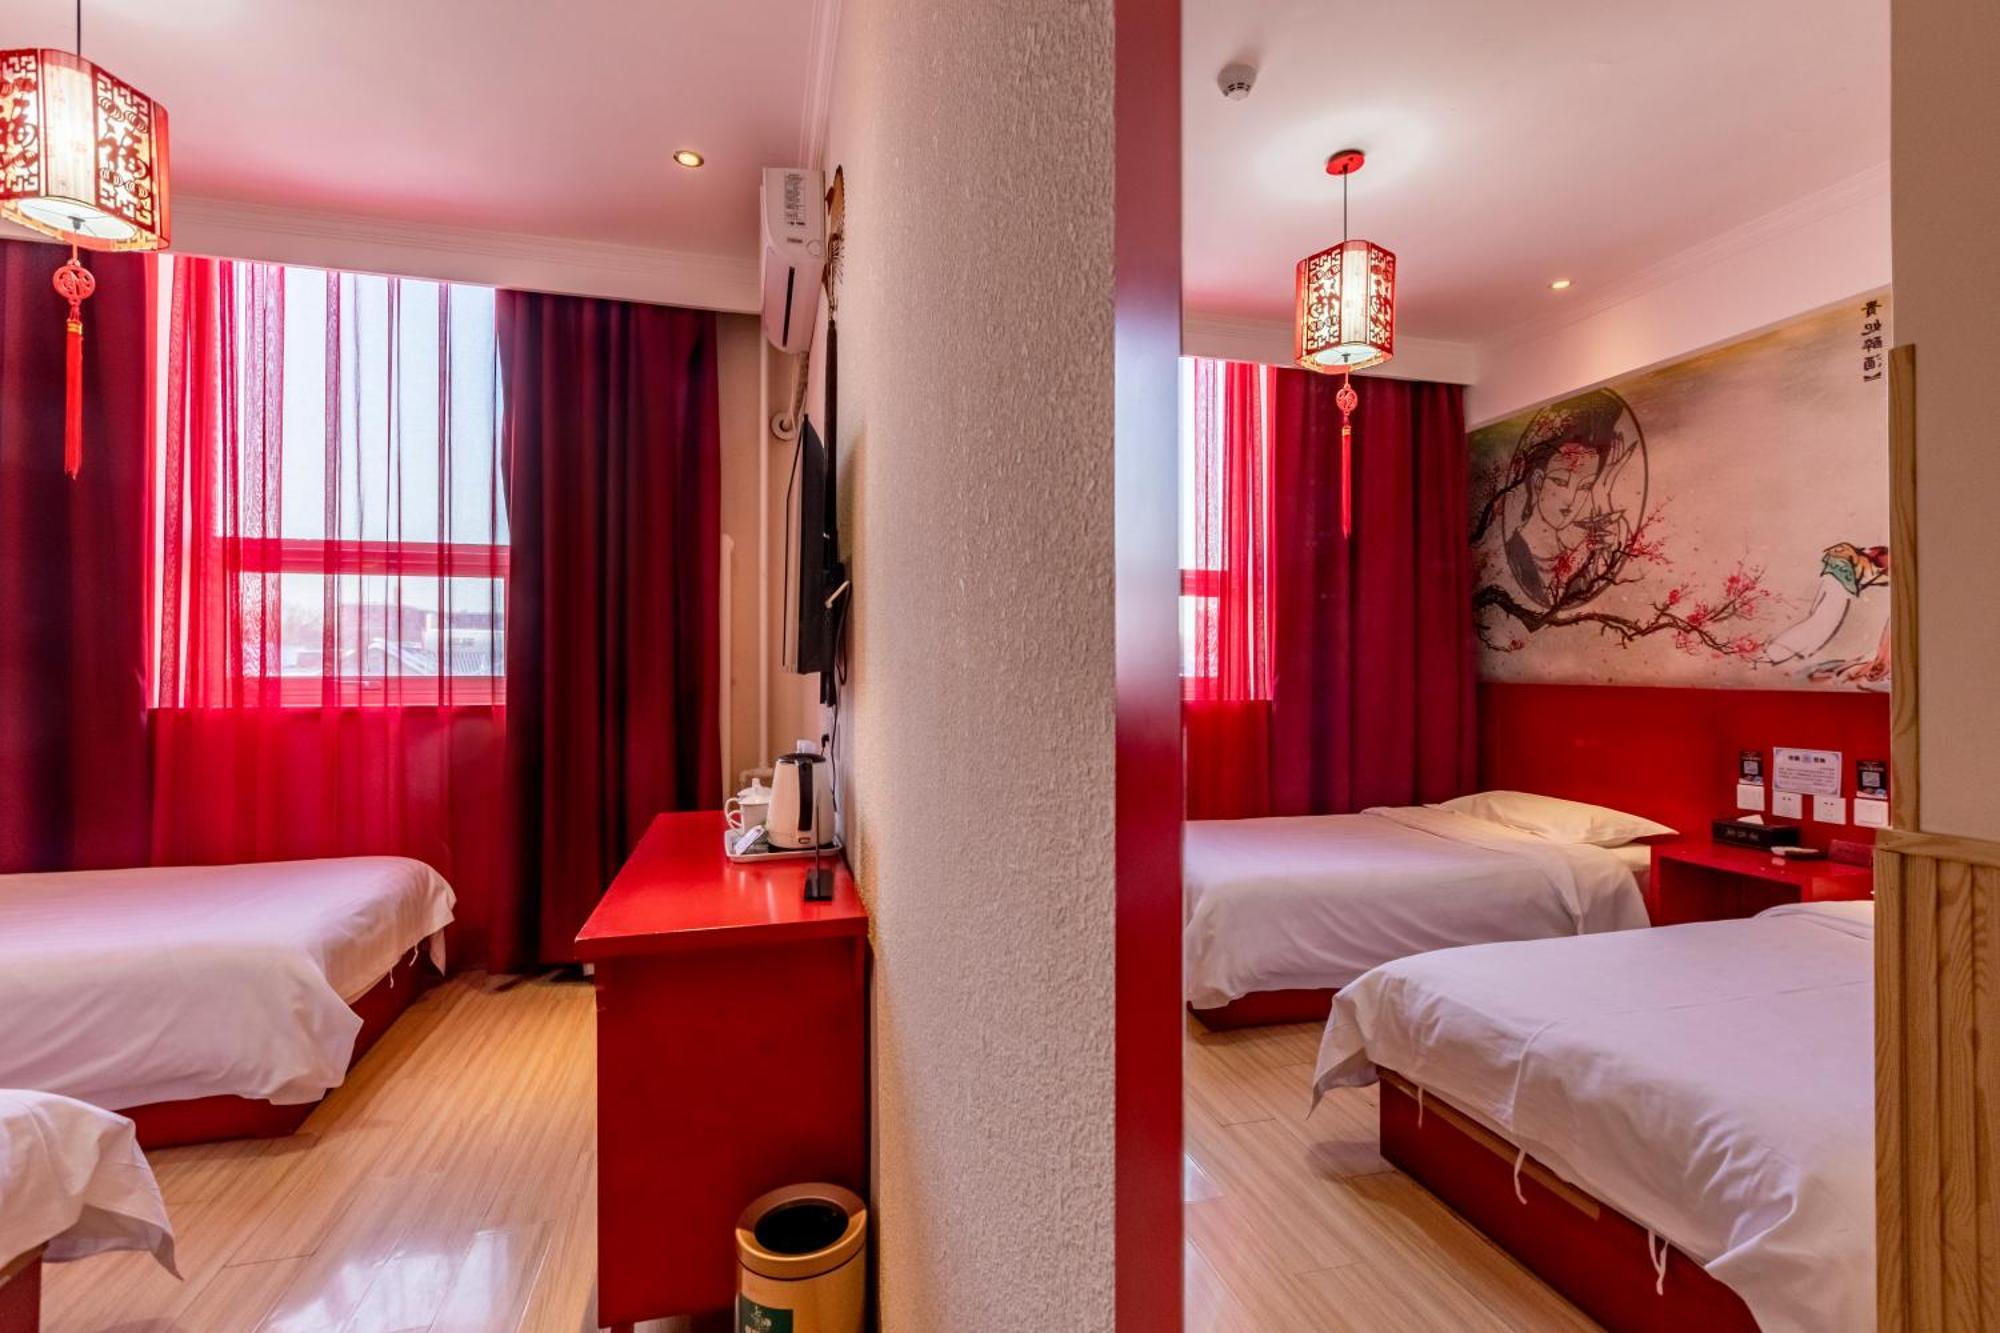 Happy Dragon Alley Hotel-In The City Center With Big Window&Free Coffe, Fluent English Speaking,Tourist Attractions Ticket Service&Food Recommendation,Near Tian Anmen Forbiddencity,Near Lama Temple,Easy To Walk To Nanluoalley&Shichahai Peking Exteriör bild